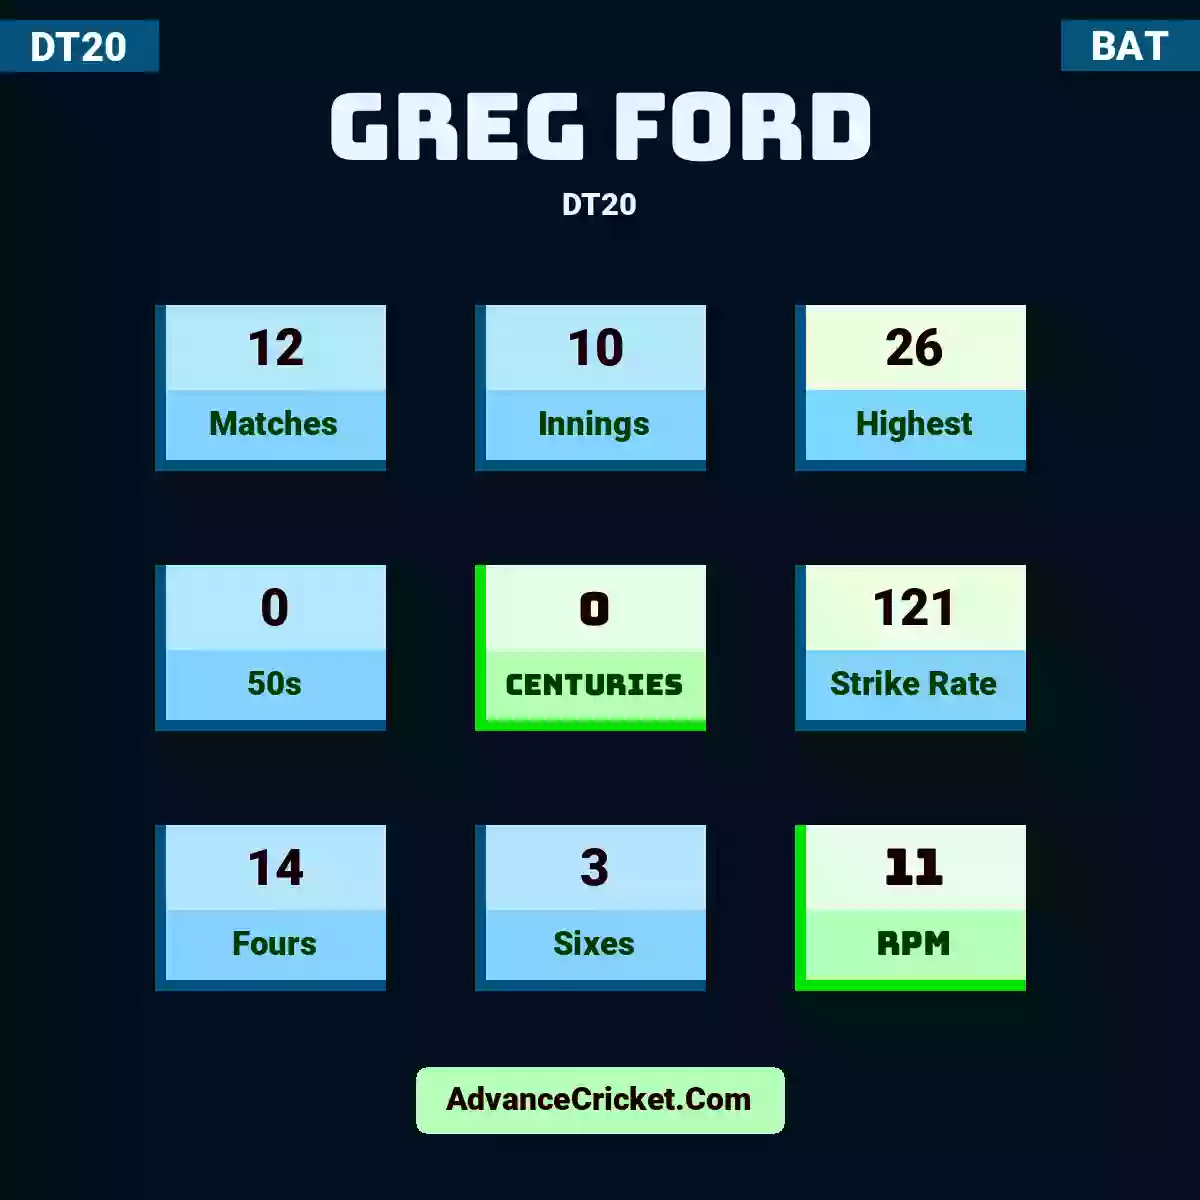 Greg Ford DT20 , Greg Ford played 12 matches, scored 26 runs as highest, 0 half-centuries, and 0 centuries, with a strike rate of 121. G.Ford hit 14 fours and 3 sixes, with an RPM of 11.